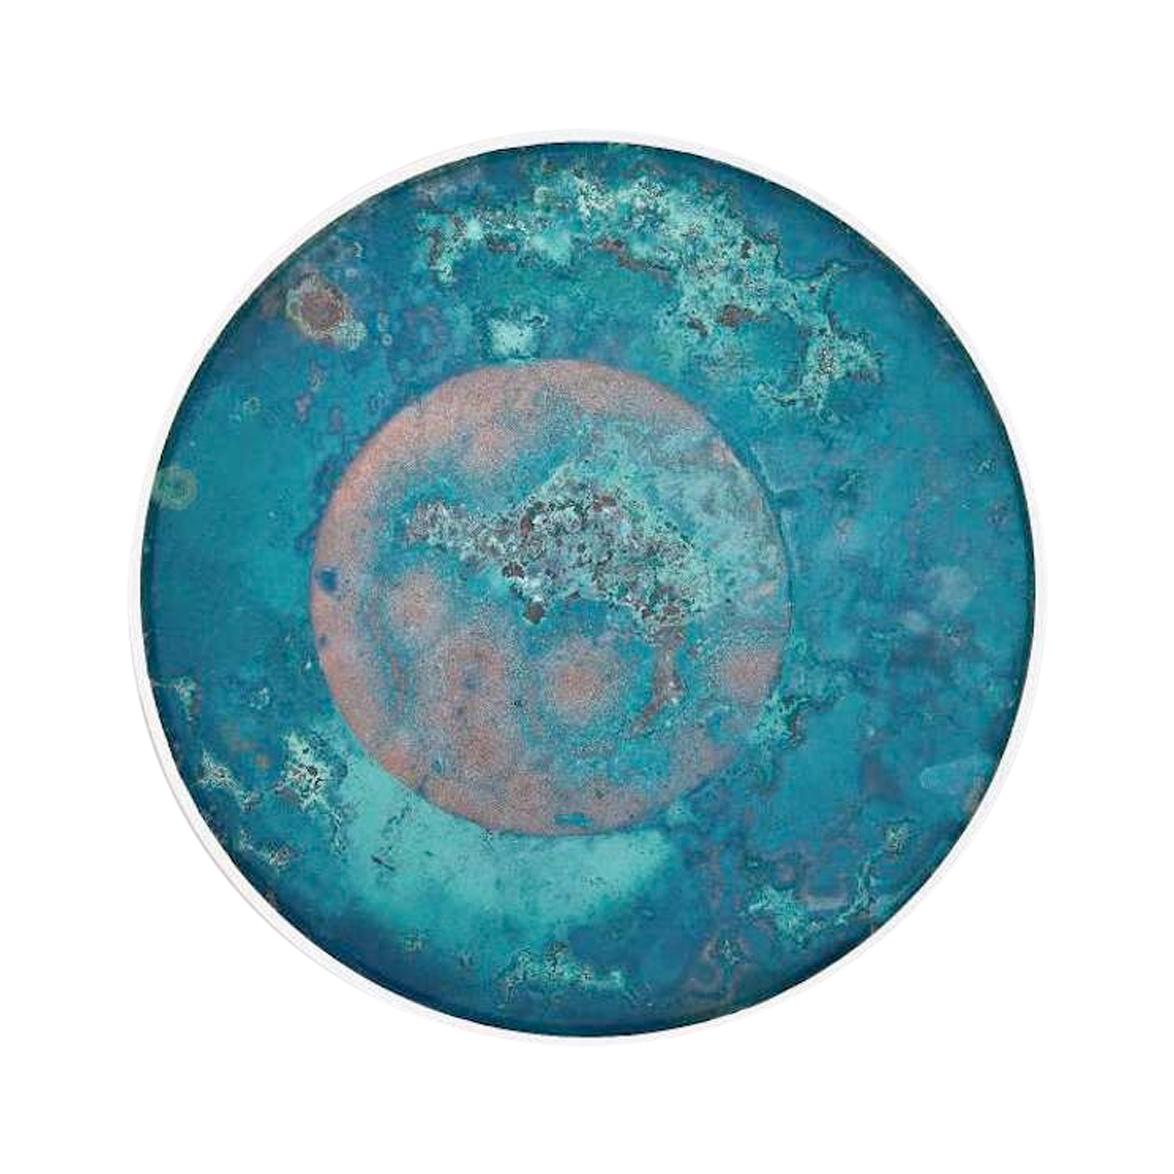 Copper & Stainless Steel Decor/ Plate, 'Star Dust 3.0 #3' by Daishi Luo